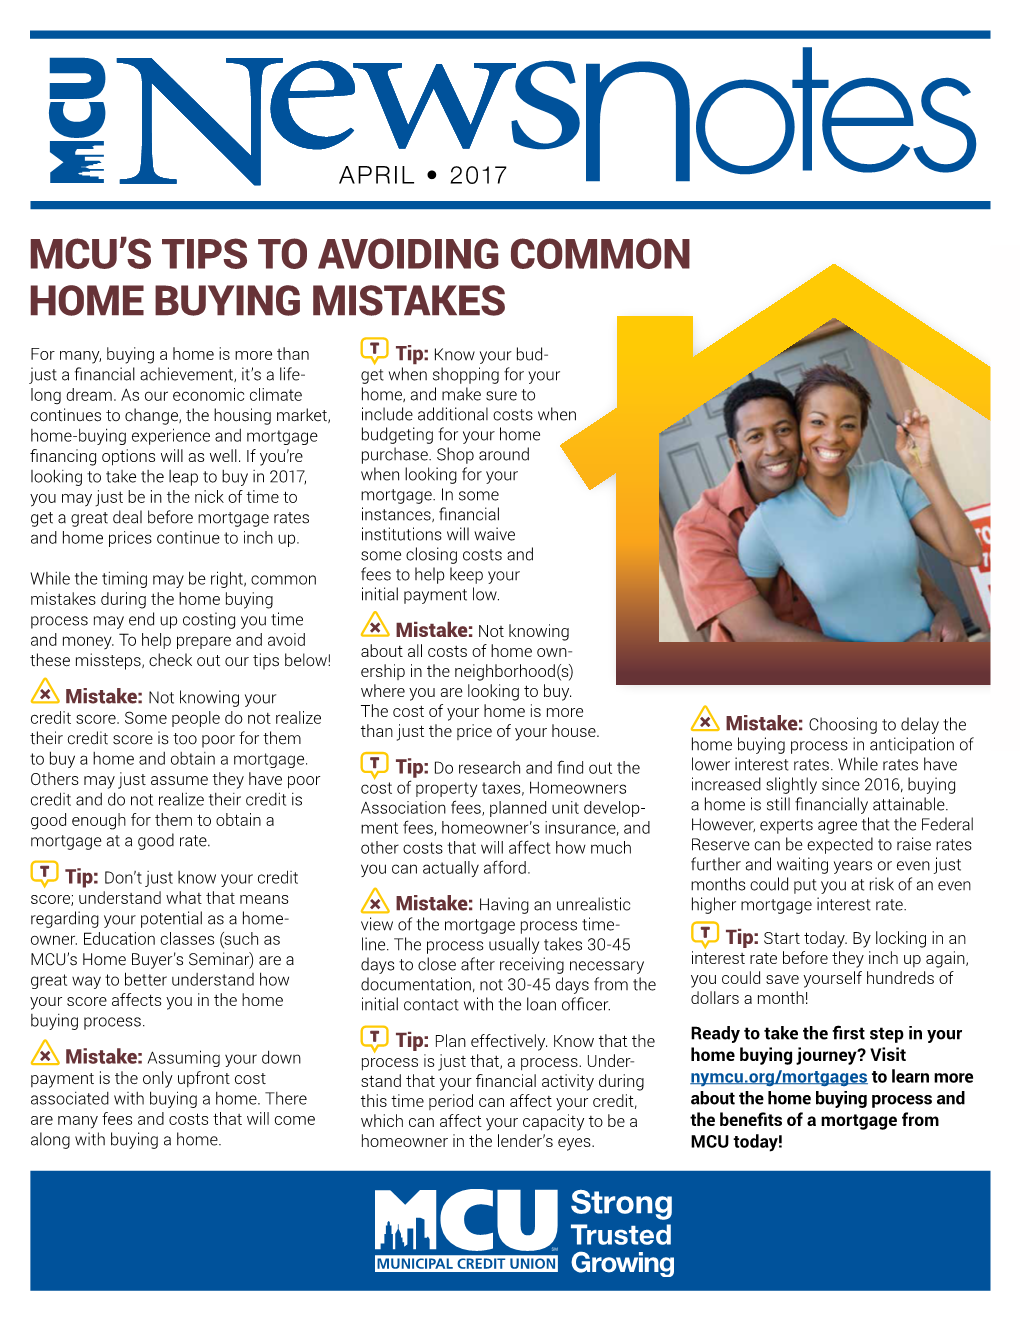 Mcu's Tips to Avoiding Common Home Buying Mistakes